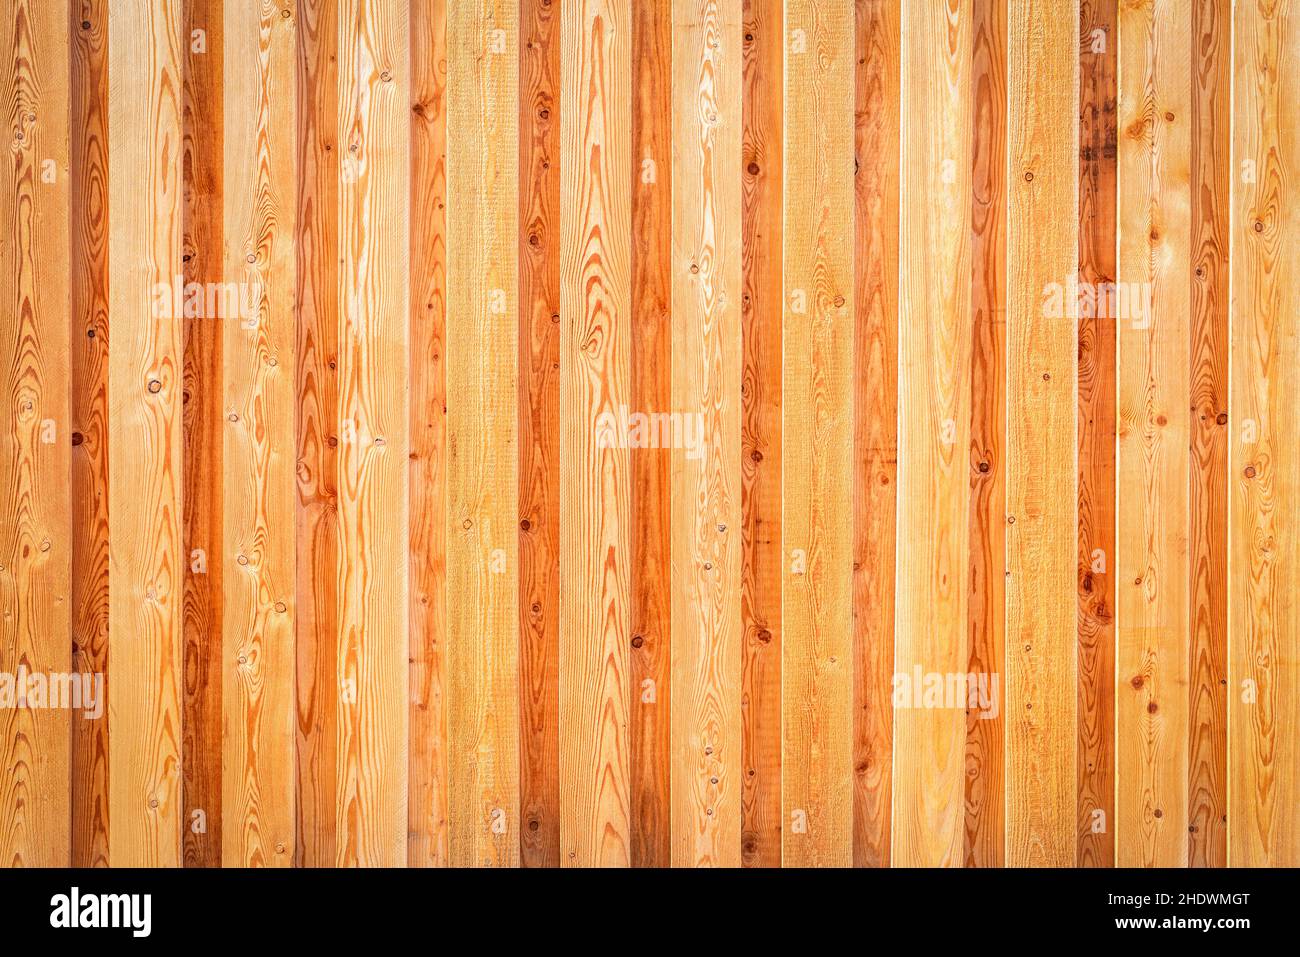 wooden wall, wood panelling, wooden walls Stock Photo